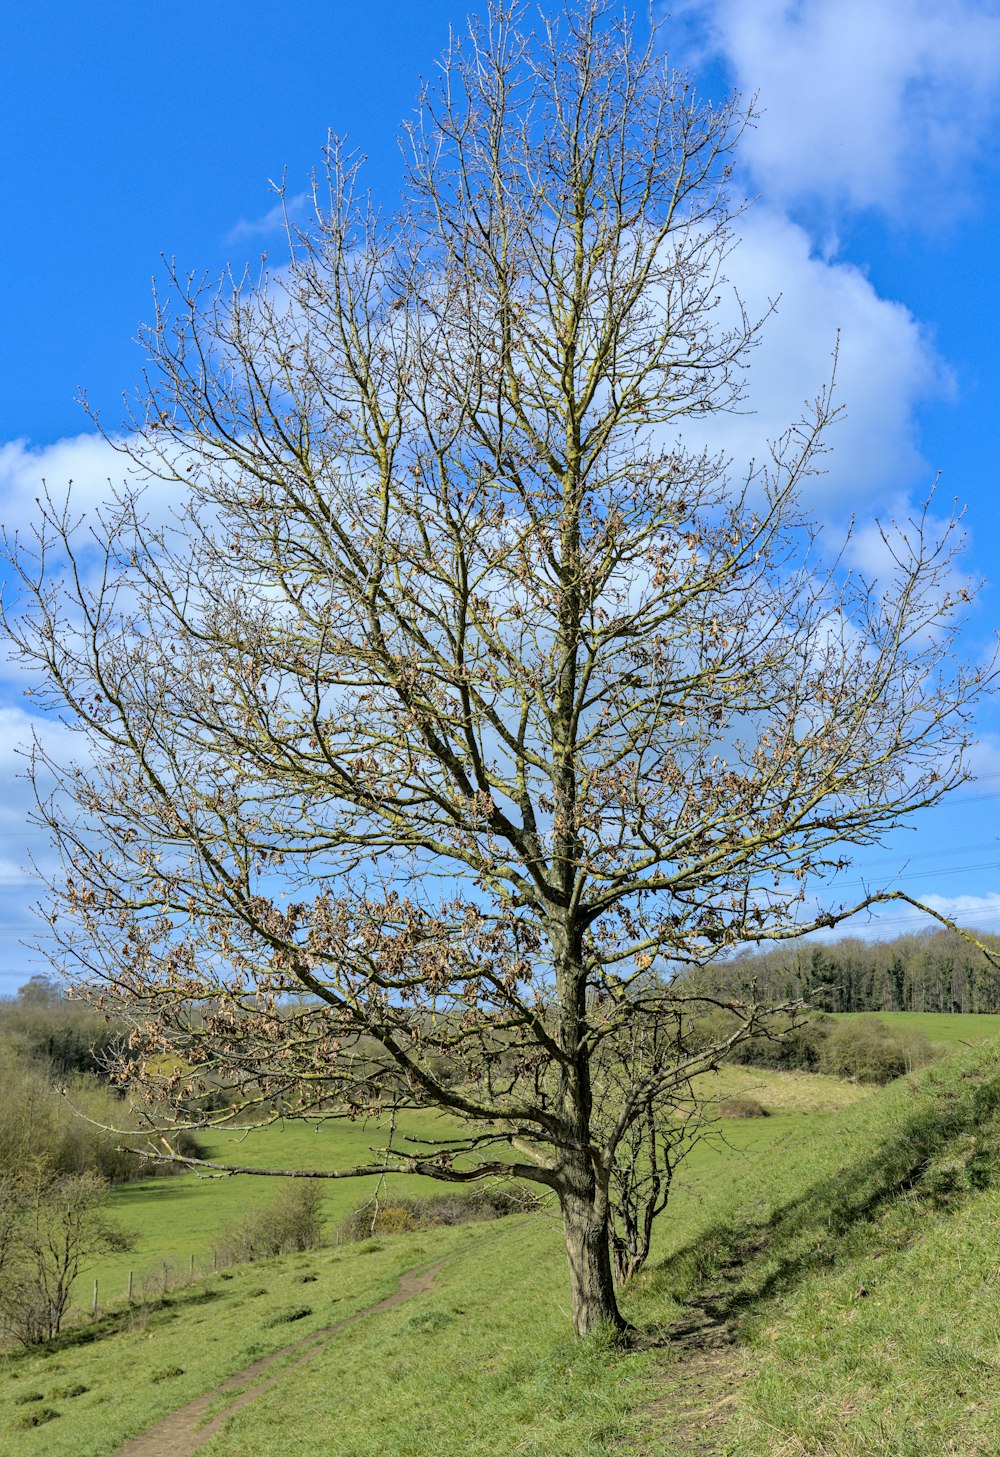 a tree with no leaves in a grassy field